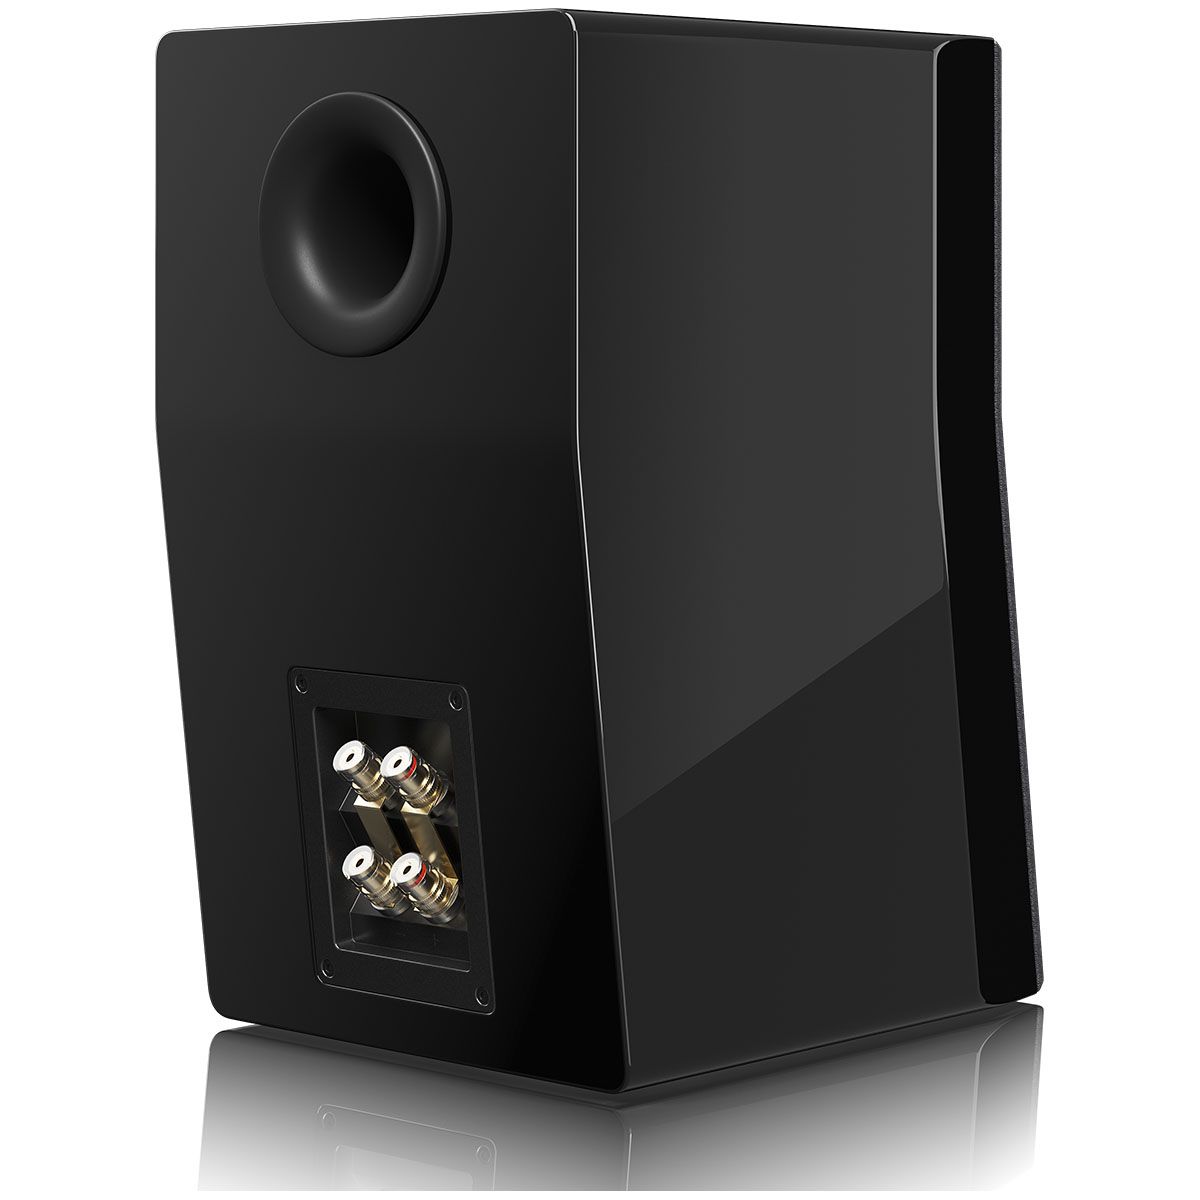 SVS Ultra Evolution Bookshelf Speaker - single piano black with grille - angled rear view with components